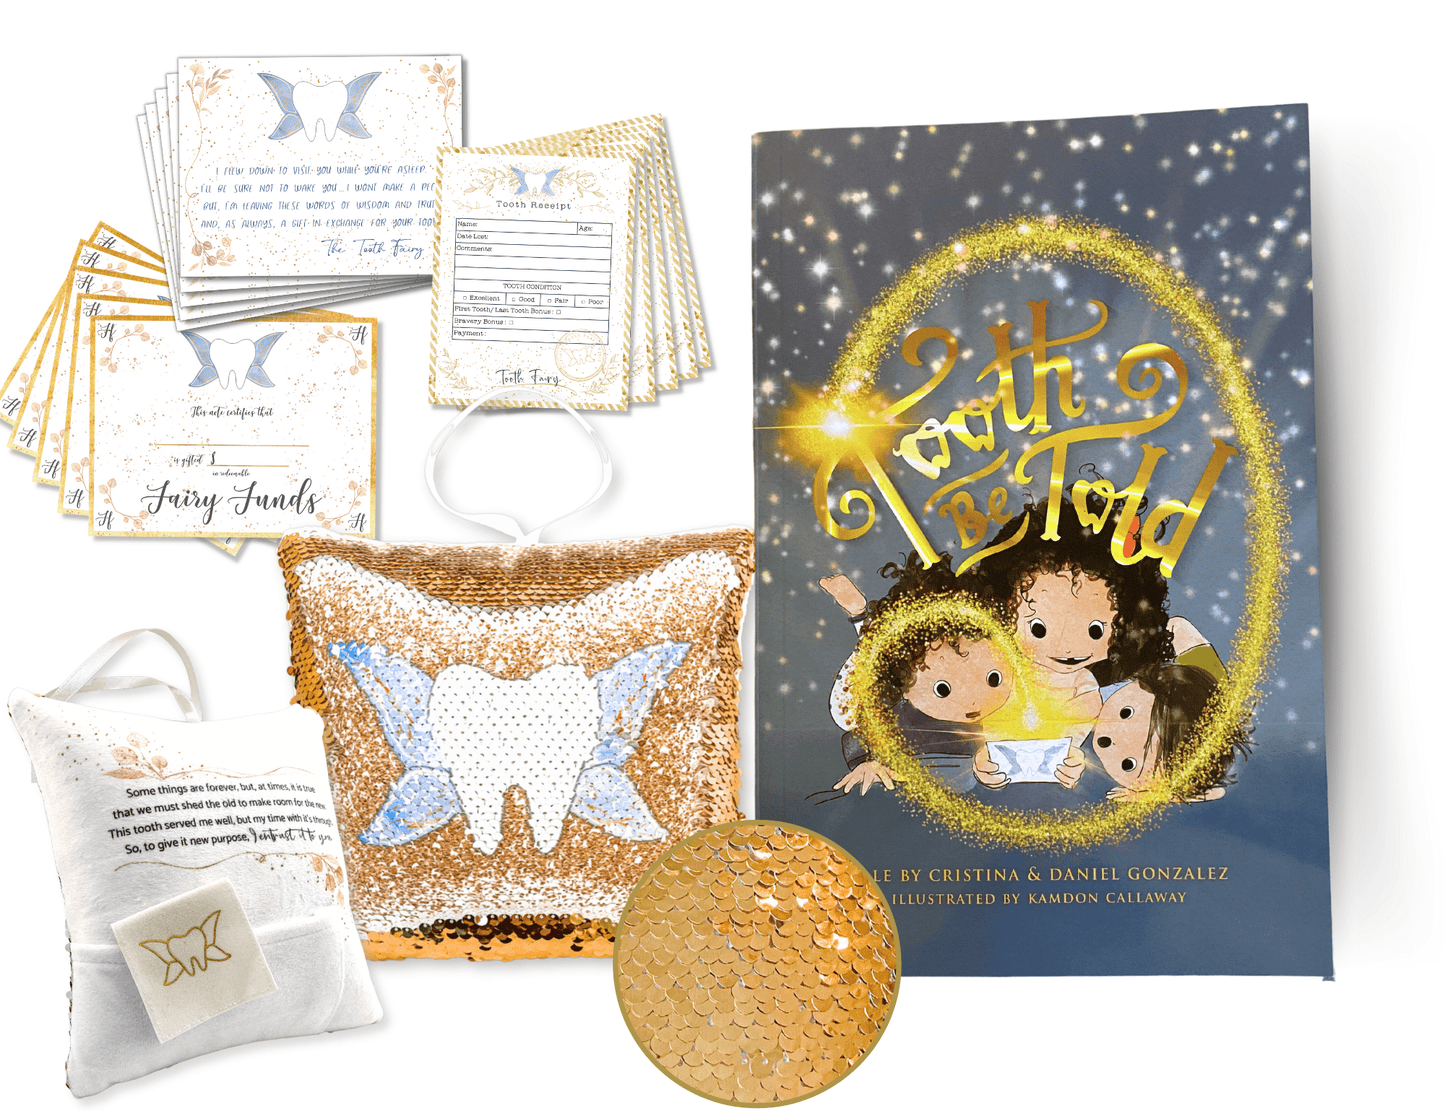 Tooth Fairy Pillow, Book, and Letter Kit